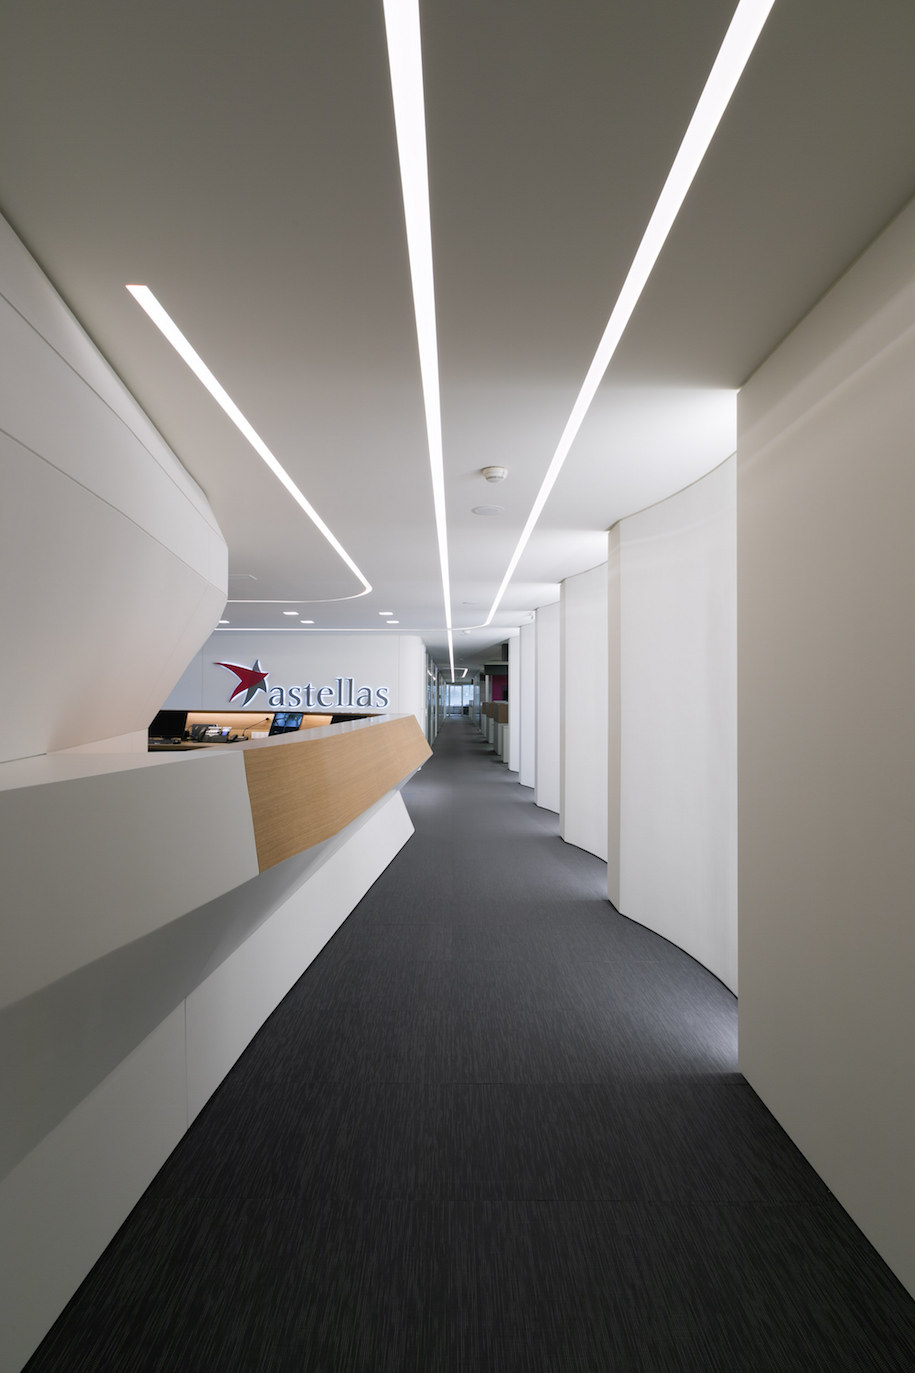 astellas, astellas pharmaceutical, scapearchitecture, asset office interiors, interiors, offices, γραφεία, μαρούσι, εσωτερική διακόσμηση